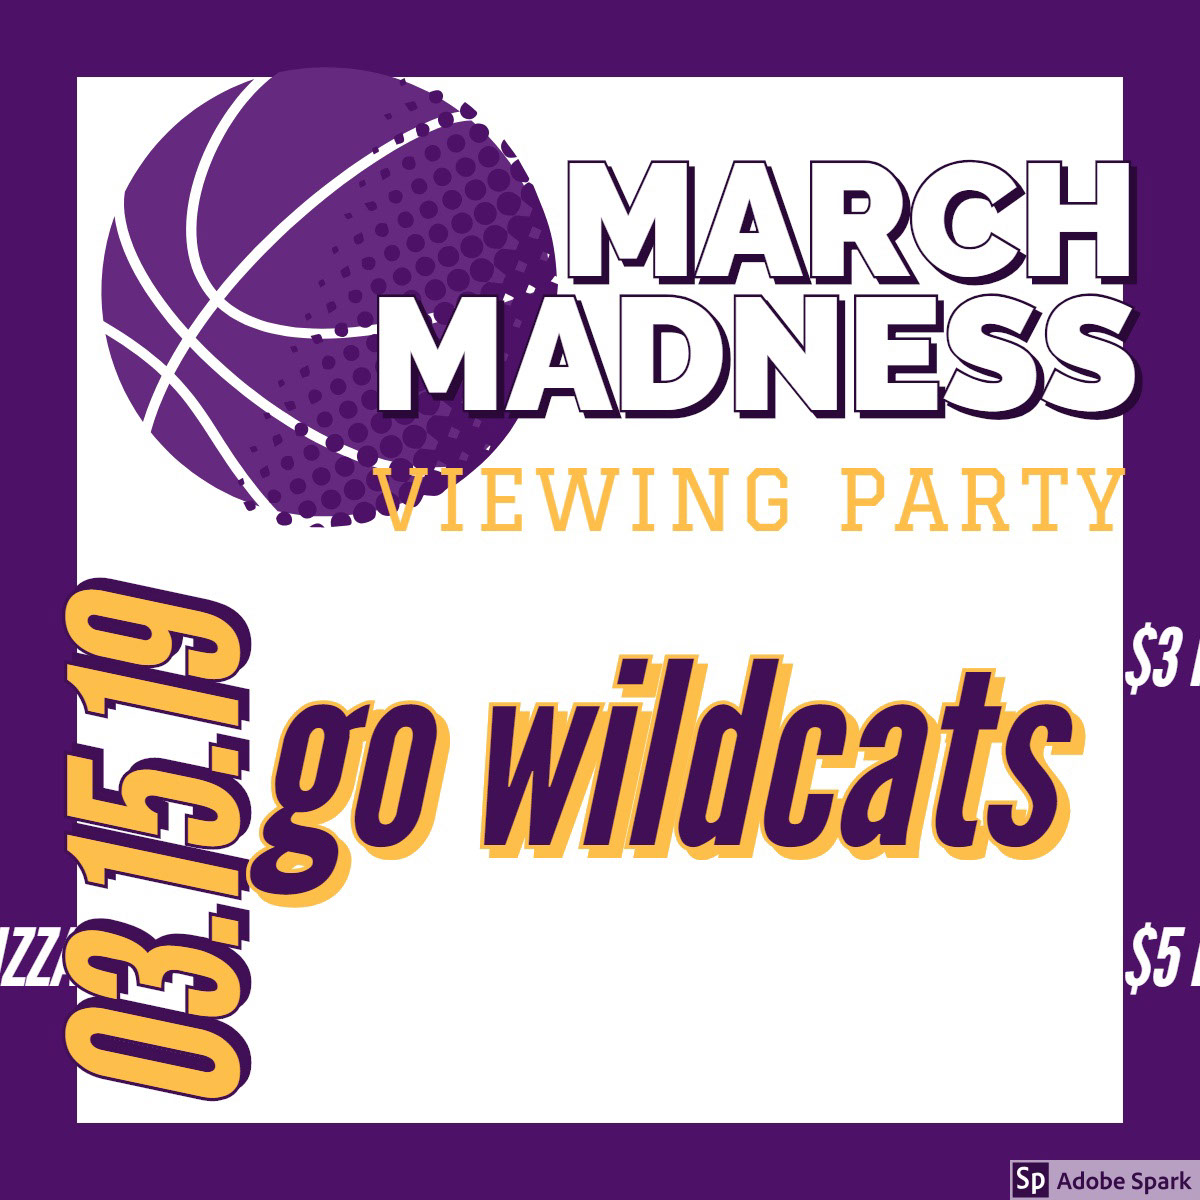 go wildcats go wildcats<P>MARCH MADNESS<BR><P>03.15.19<P>$5 WINGS<P>VIEWING PARTY<P>$5 HOUSE WINES<P>$3 PRETZELS<P>$10 PIZZA